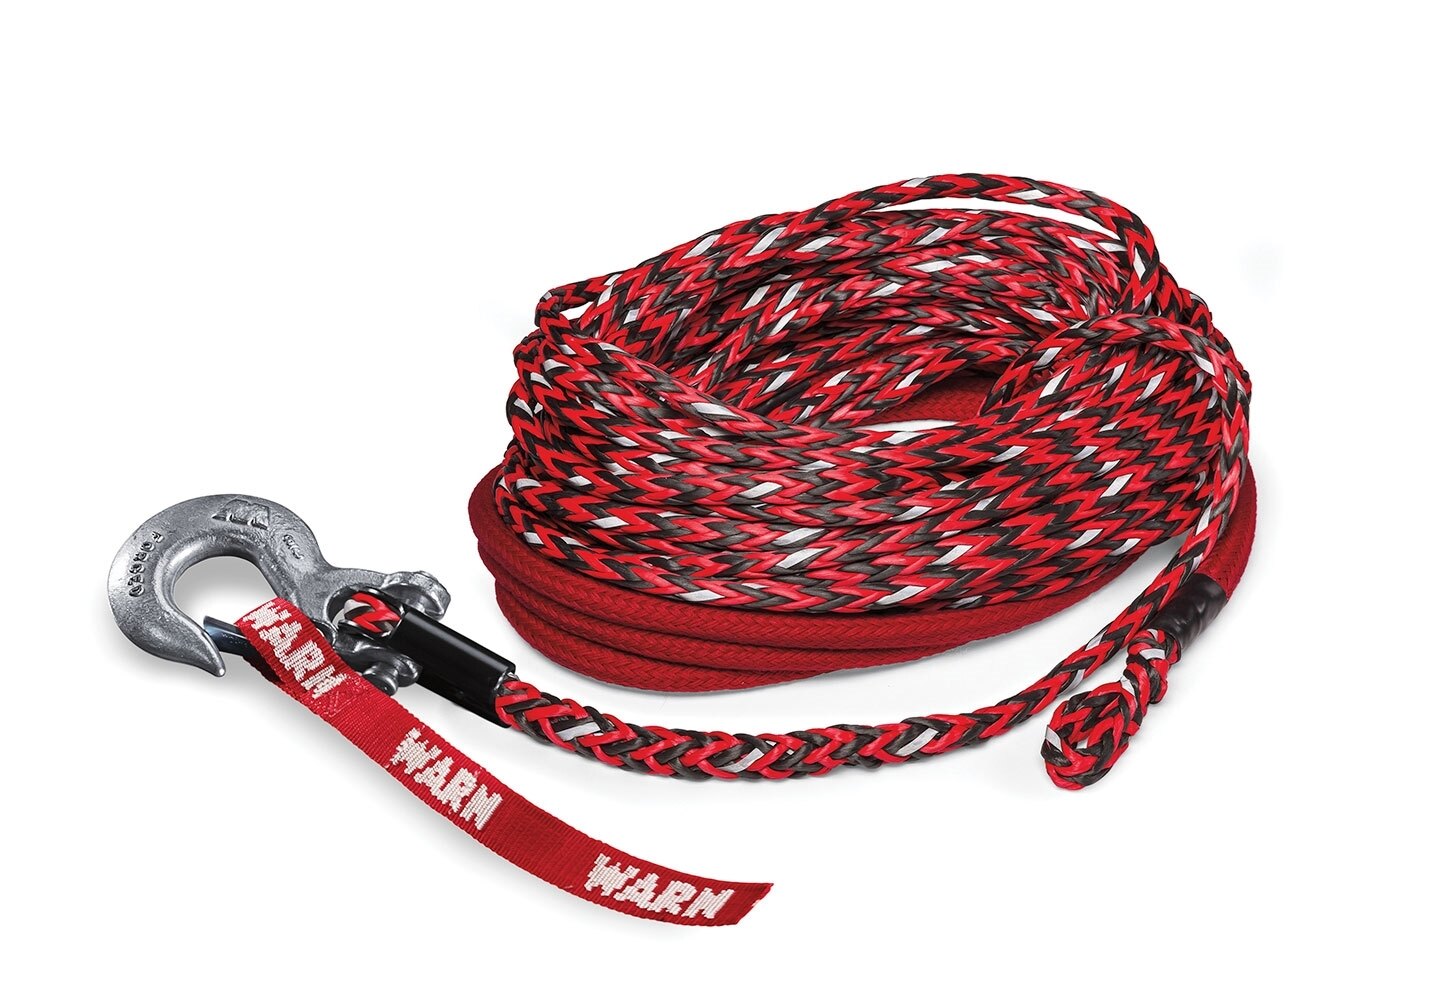 Details about   Synthetic Rope Replacement Kit~2005 Bombardier Outlander Max 400 HO Warn 72128 